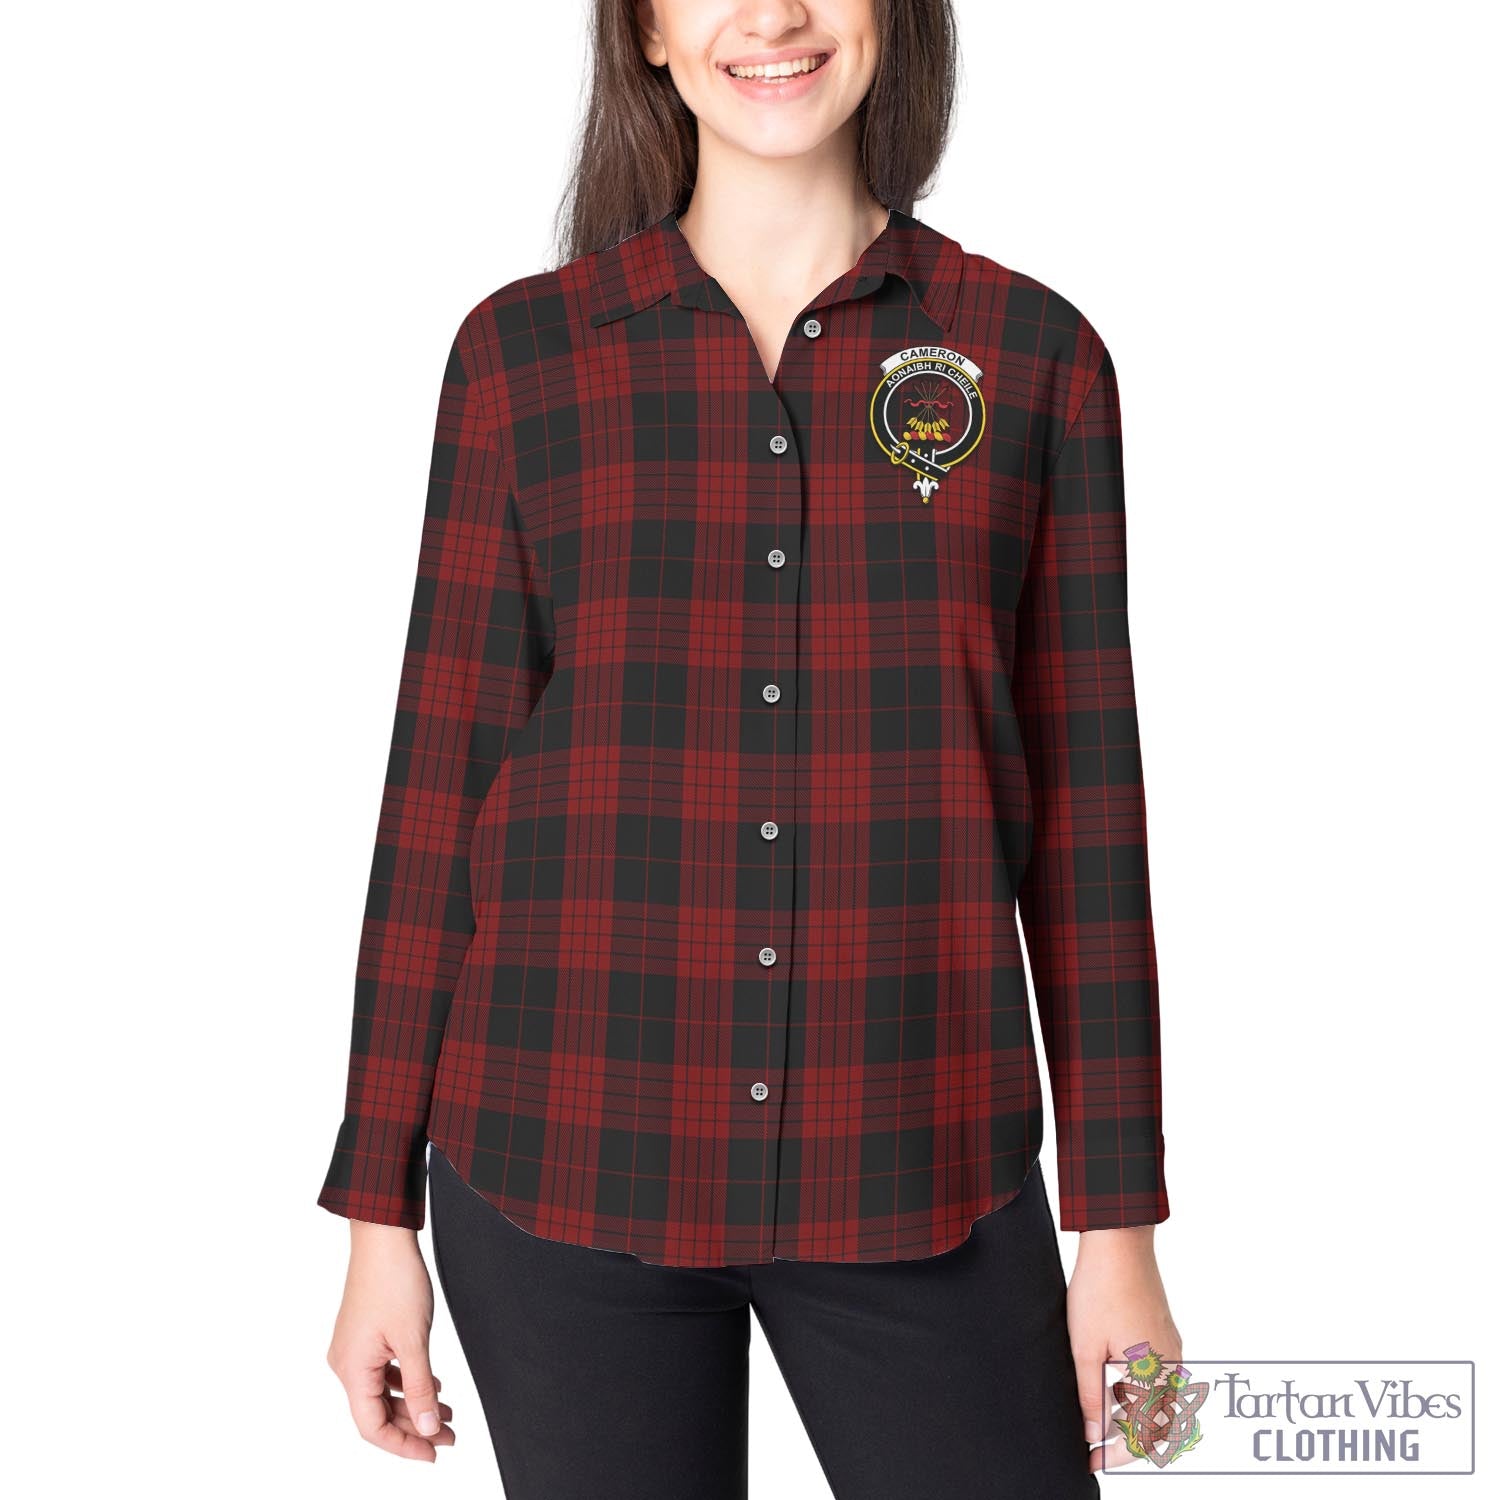 Tartan Vibes Clothing Cameron Black and Red Tartan Womens Casual Shirt with Family Crest